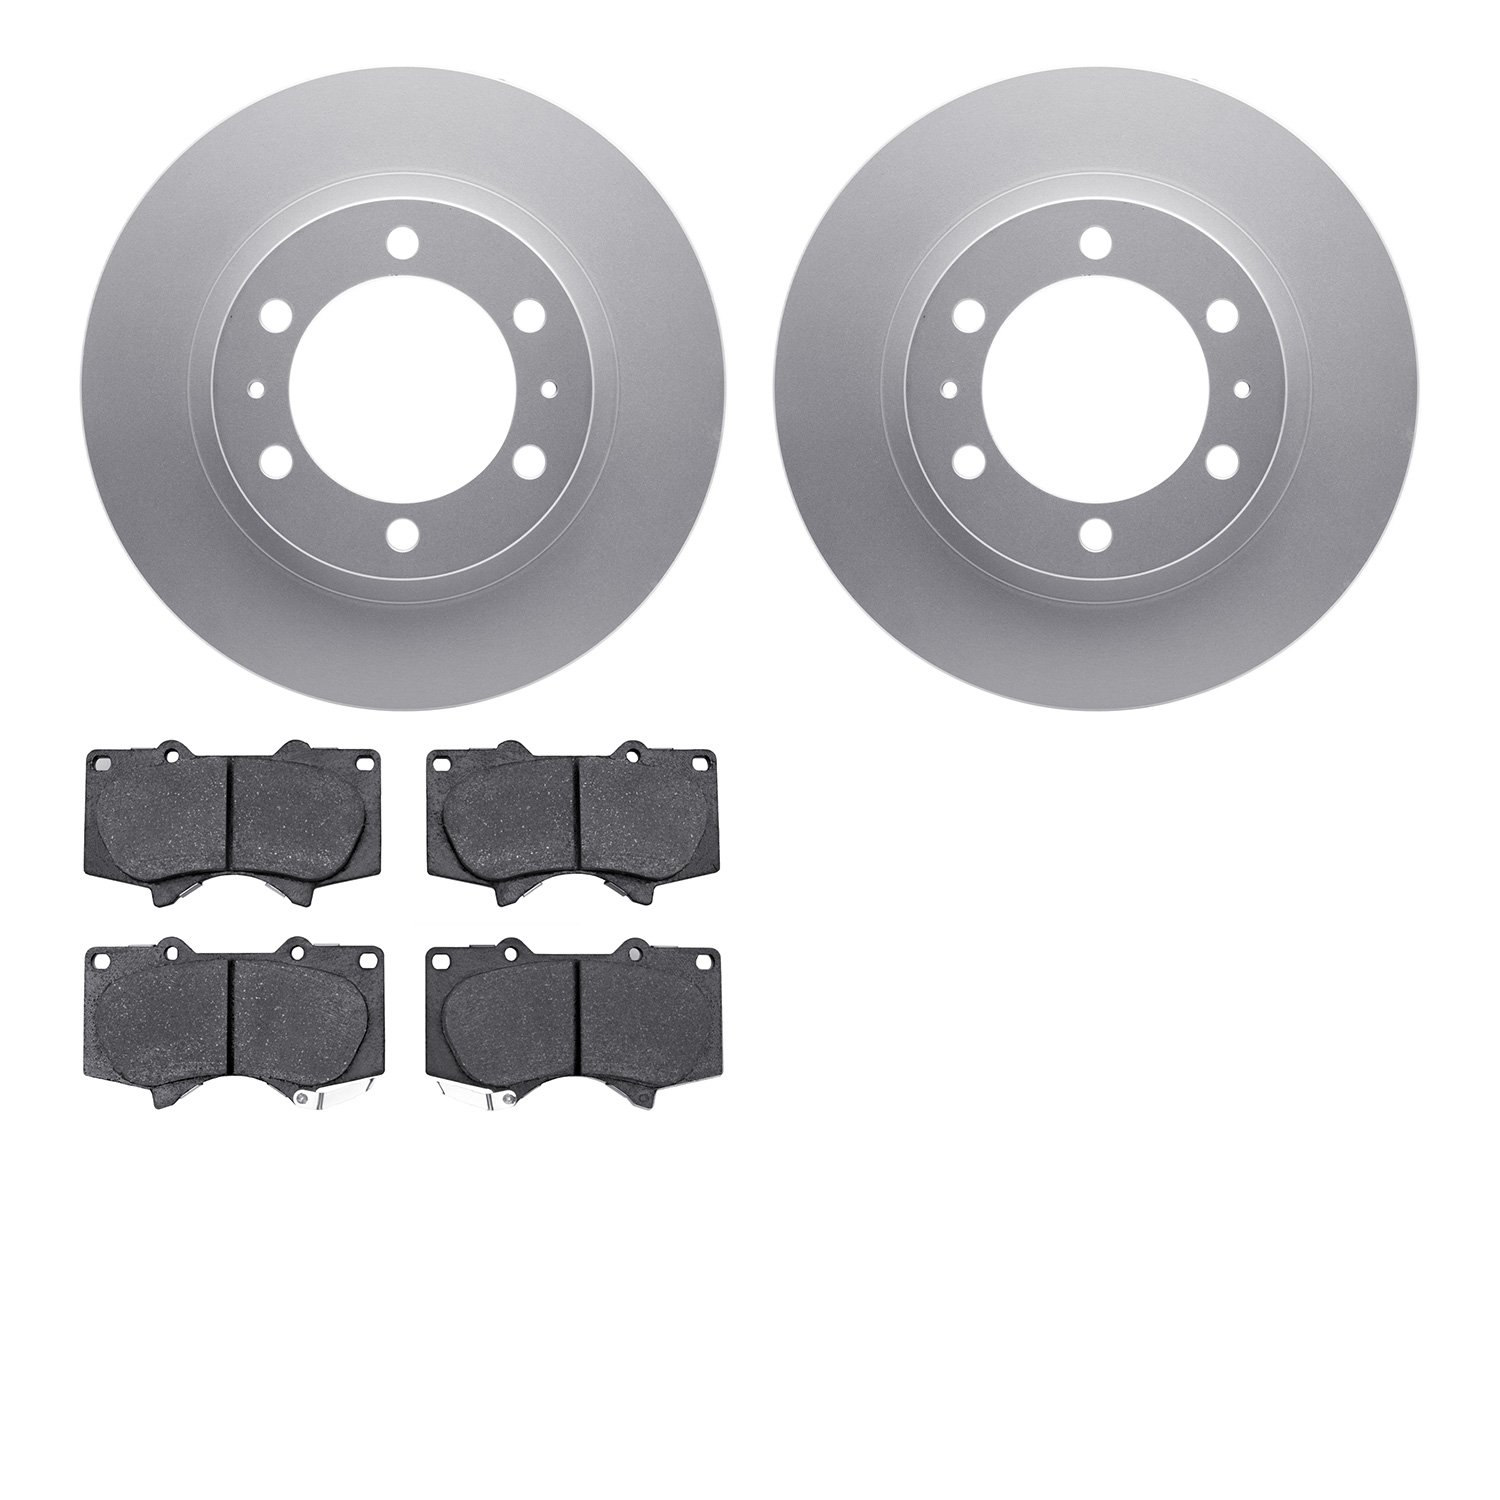 4402-76011 Geospec Brake Rotors with Ultimate-Duty Brake Pads Kit, Fits Select Lexus/Toyota/Scion, Position: Front